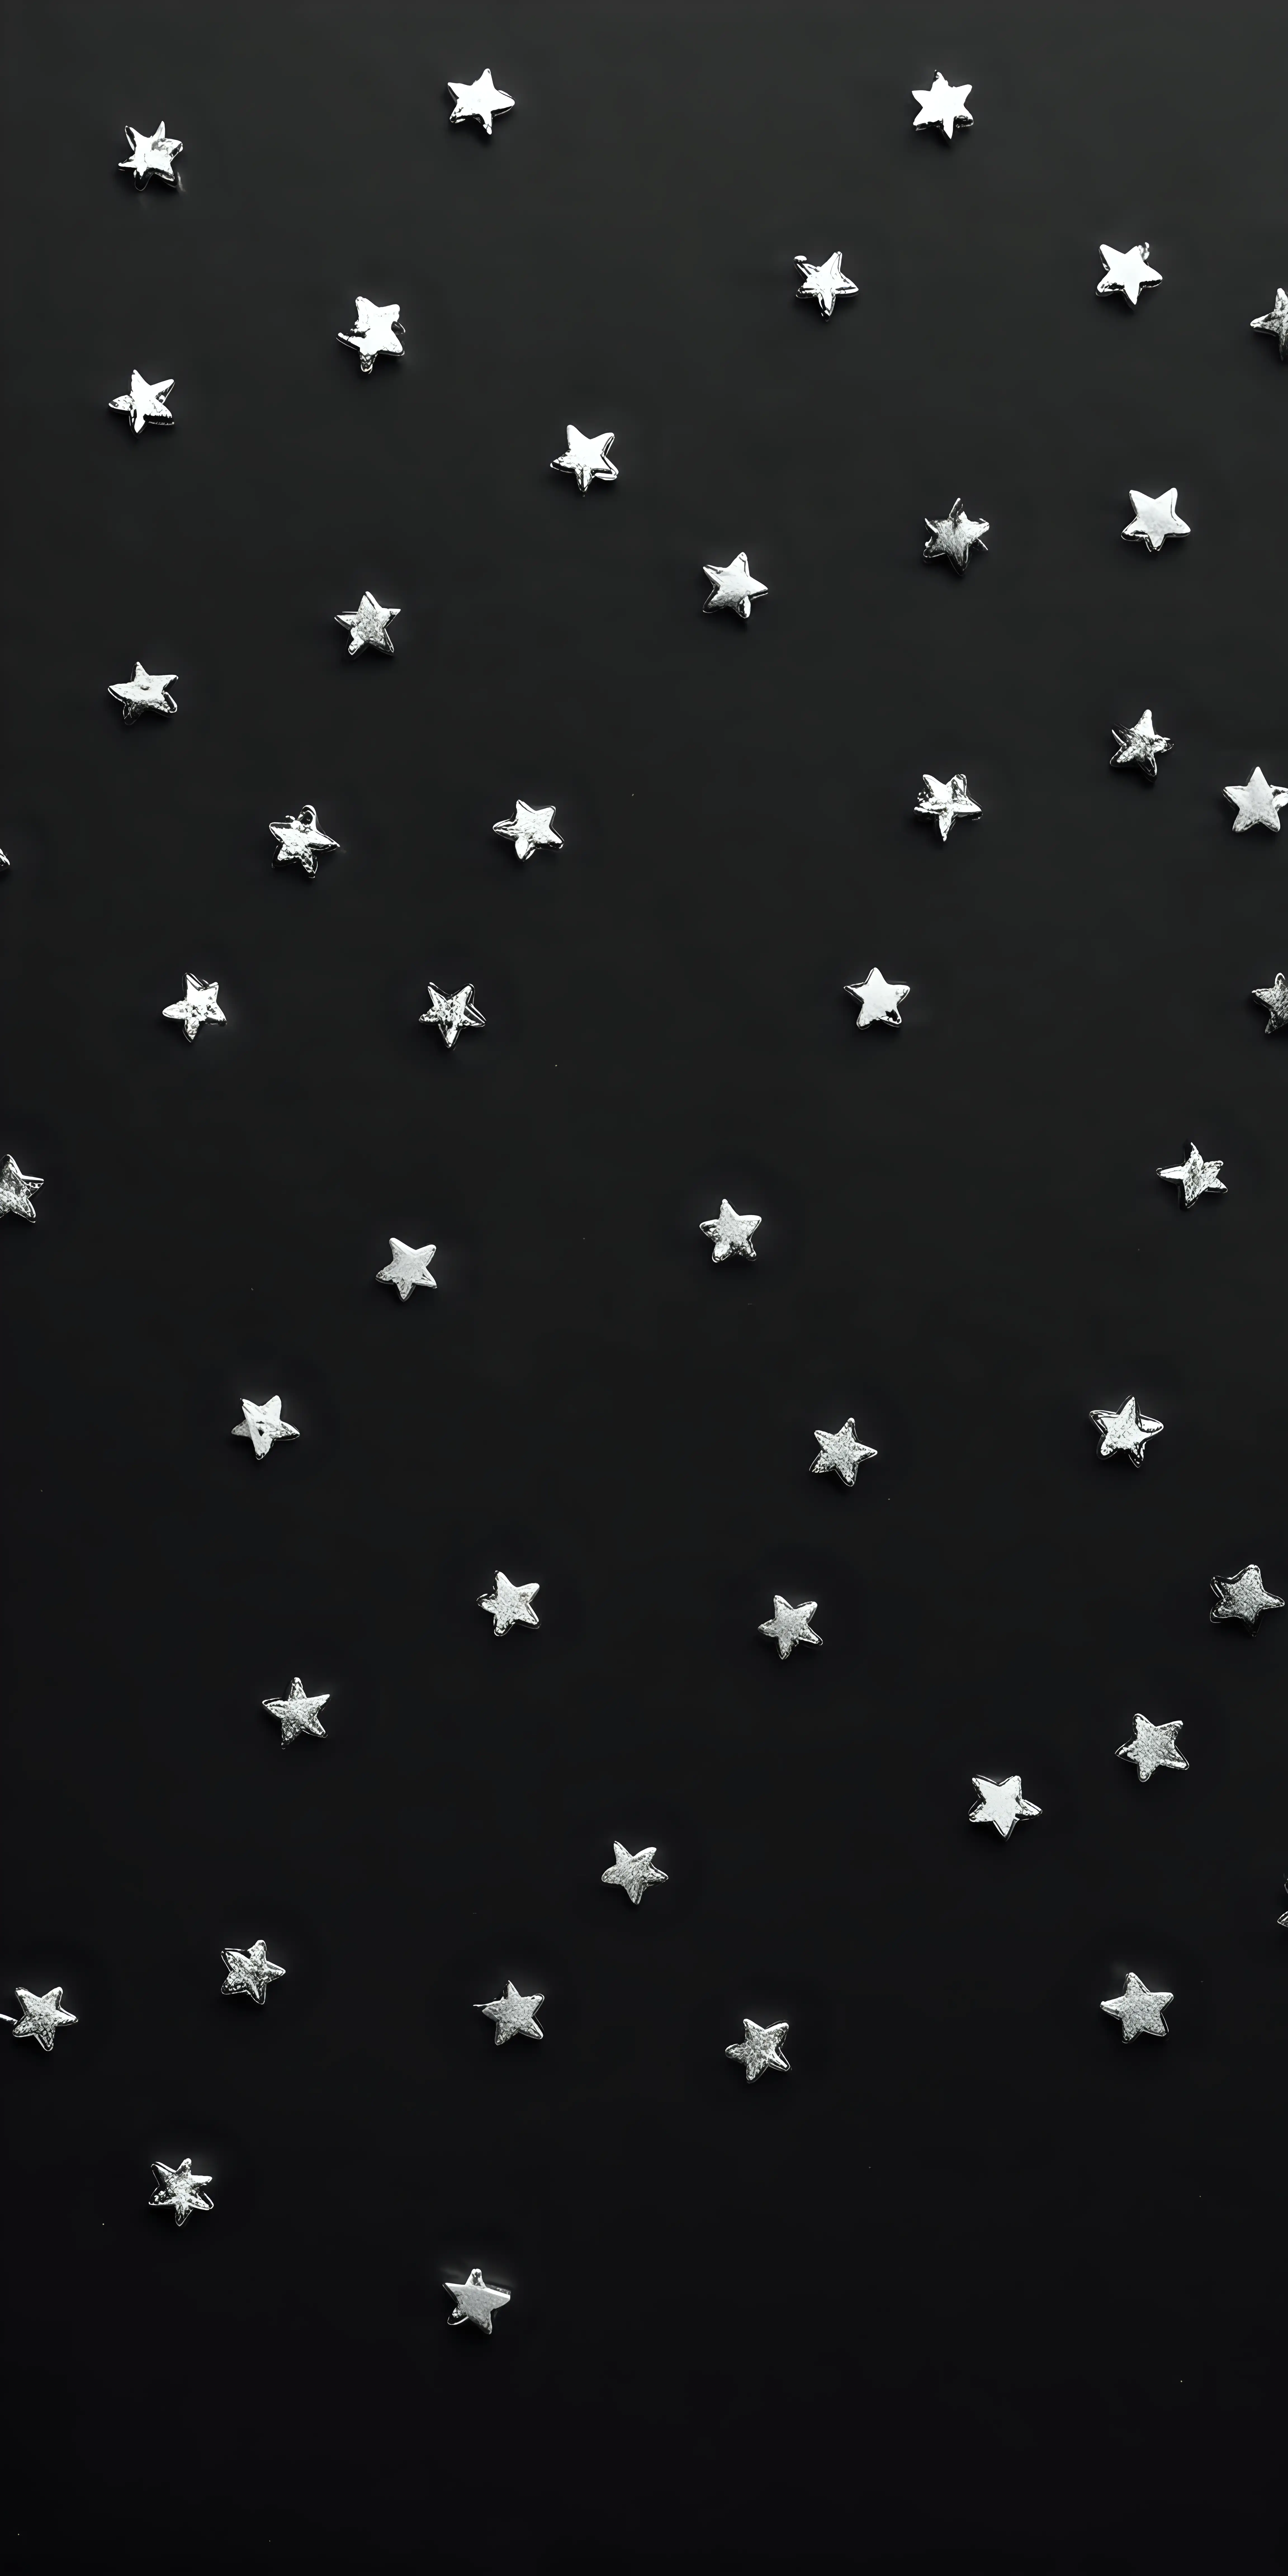 Just TEN tiny silver stars randomly placed on a black background